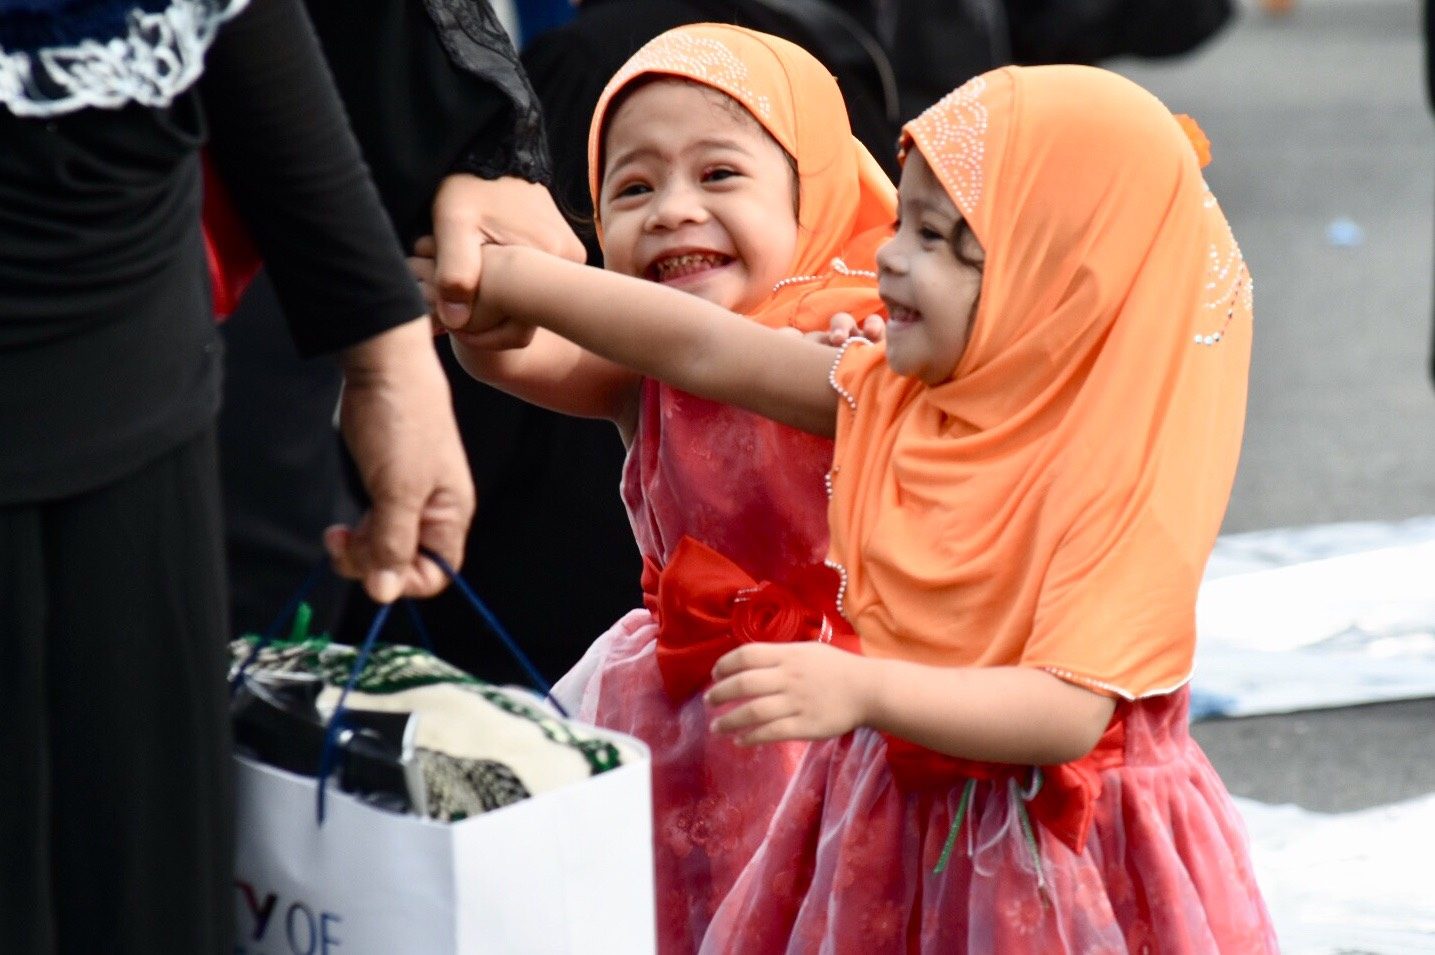 HOPE FOR THE FUTURE. Two young Muslims smile during the Eid'l Fitr celebration at the Quirino Grandstand in Manila on June 15, 2018. Photo by Angie de Silva/Rappler 